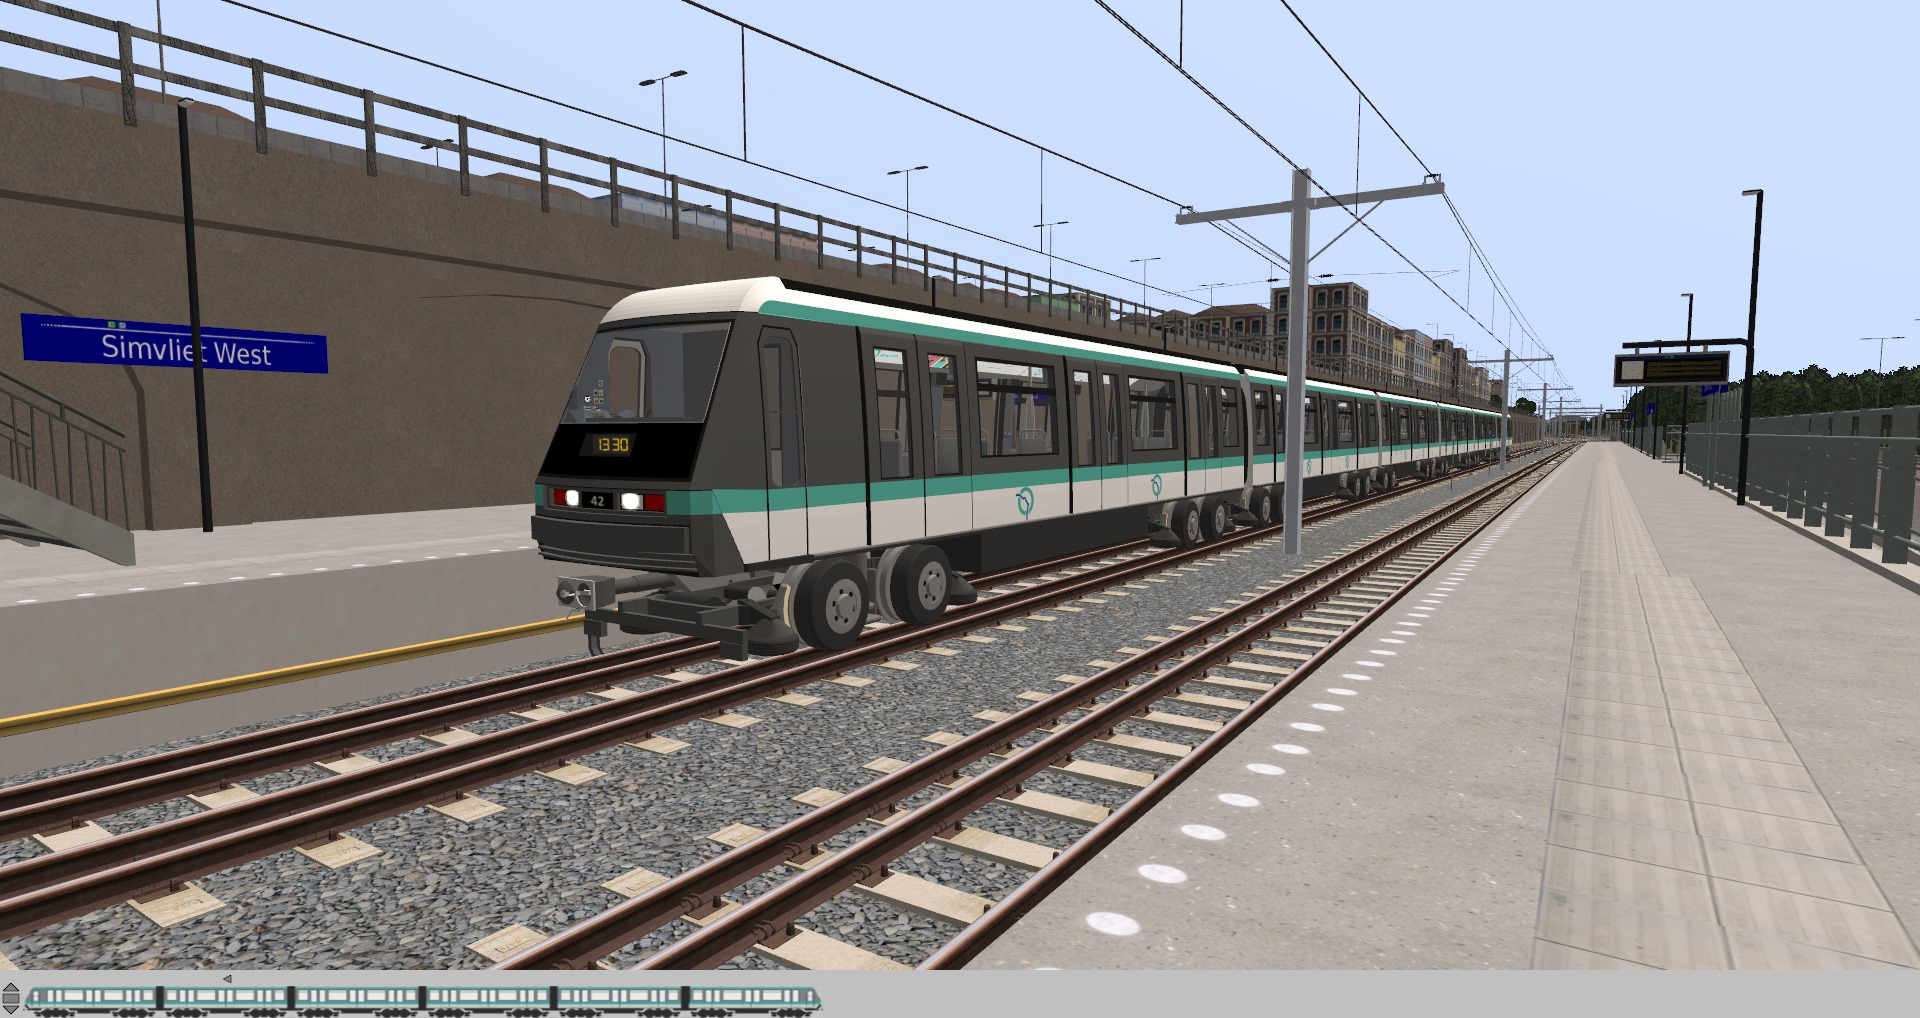 Here is an ex-Parisian MP89CC set on line C. This set was transferred to Simvliet in 2020 following a shortage of rolling stock caused by the recent Lightrail and the extension of Line C.